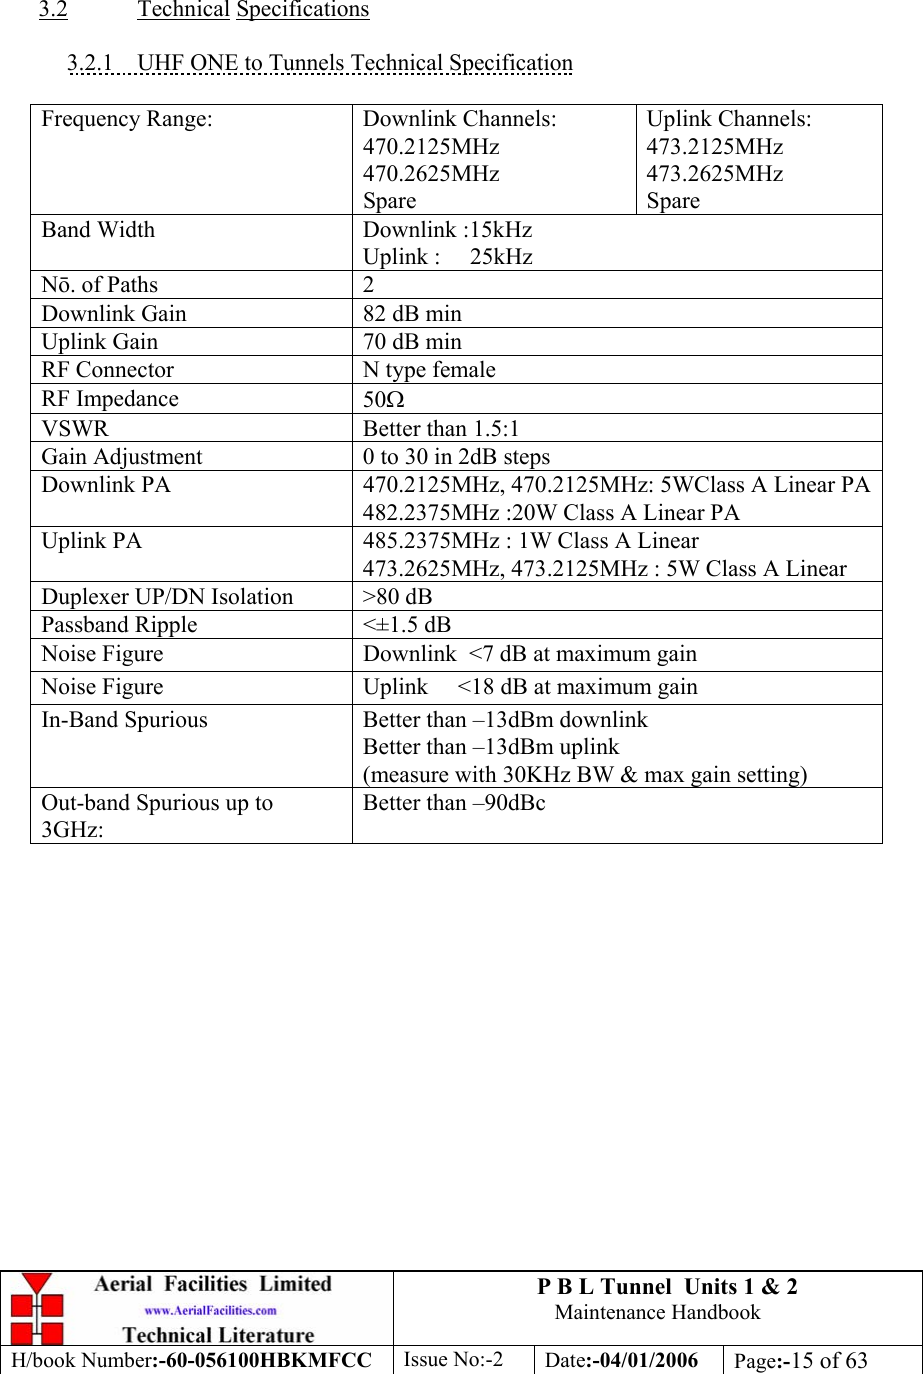 P B L Tunnel  Units 1 &amp; 2 Maintenance Handbook H/book Number:-60-056100HBKMFCC  Issue No:-2  Date:-04/01/2006  Page:-15 of 63    3.2 Technical Specifications  3.2.1  UHF ONE to Tunnels Technical Specification  Frequency Range:  Downlink Channels: 470.2125MHz 470.2625MHz Spare Uplink Channels: 473.2125MHz 473.2625MHz Spare Band Width  Downlink :15kHz Uplink :     25kHz N. of Paths  2 Downlink Gain  82 dB min Uplink Gain  70 dB min RF Connector  N type female RF Impedance  50Ω VSWR   Better than 1.5:1 Gain Adjustment  0 to 30 in 2dB steps  Downlink PA  470.2125MHz, 470.2125MHz: 5WClass A Linear PA 482.2375MHz :20W Class A Linear PA Uplink PA  485.2375MHz : 1W Class A Linear  473.2625MHz, 473.2125MHz : 5W Class A Linear Duplexer UP/DN Isolation  &gt;80 dB Passband Ripple  &lt;±1.5 dB Noise Figure  Downlink  &lt;7 dB at maximum gain Noise Figure  Uplink     &lt;18 dB at maximum gain In-Band Spurious  Better than –13dBm downlink Better than –13dBm uplink (measure with 30KHz BW &amp; max gain setting) Out-band Spurious up to 3GHz: Better than –90dBc   